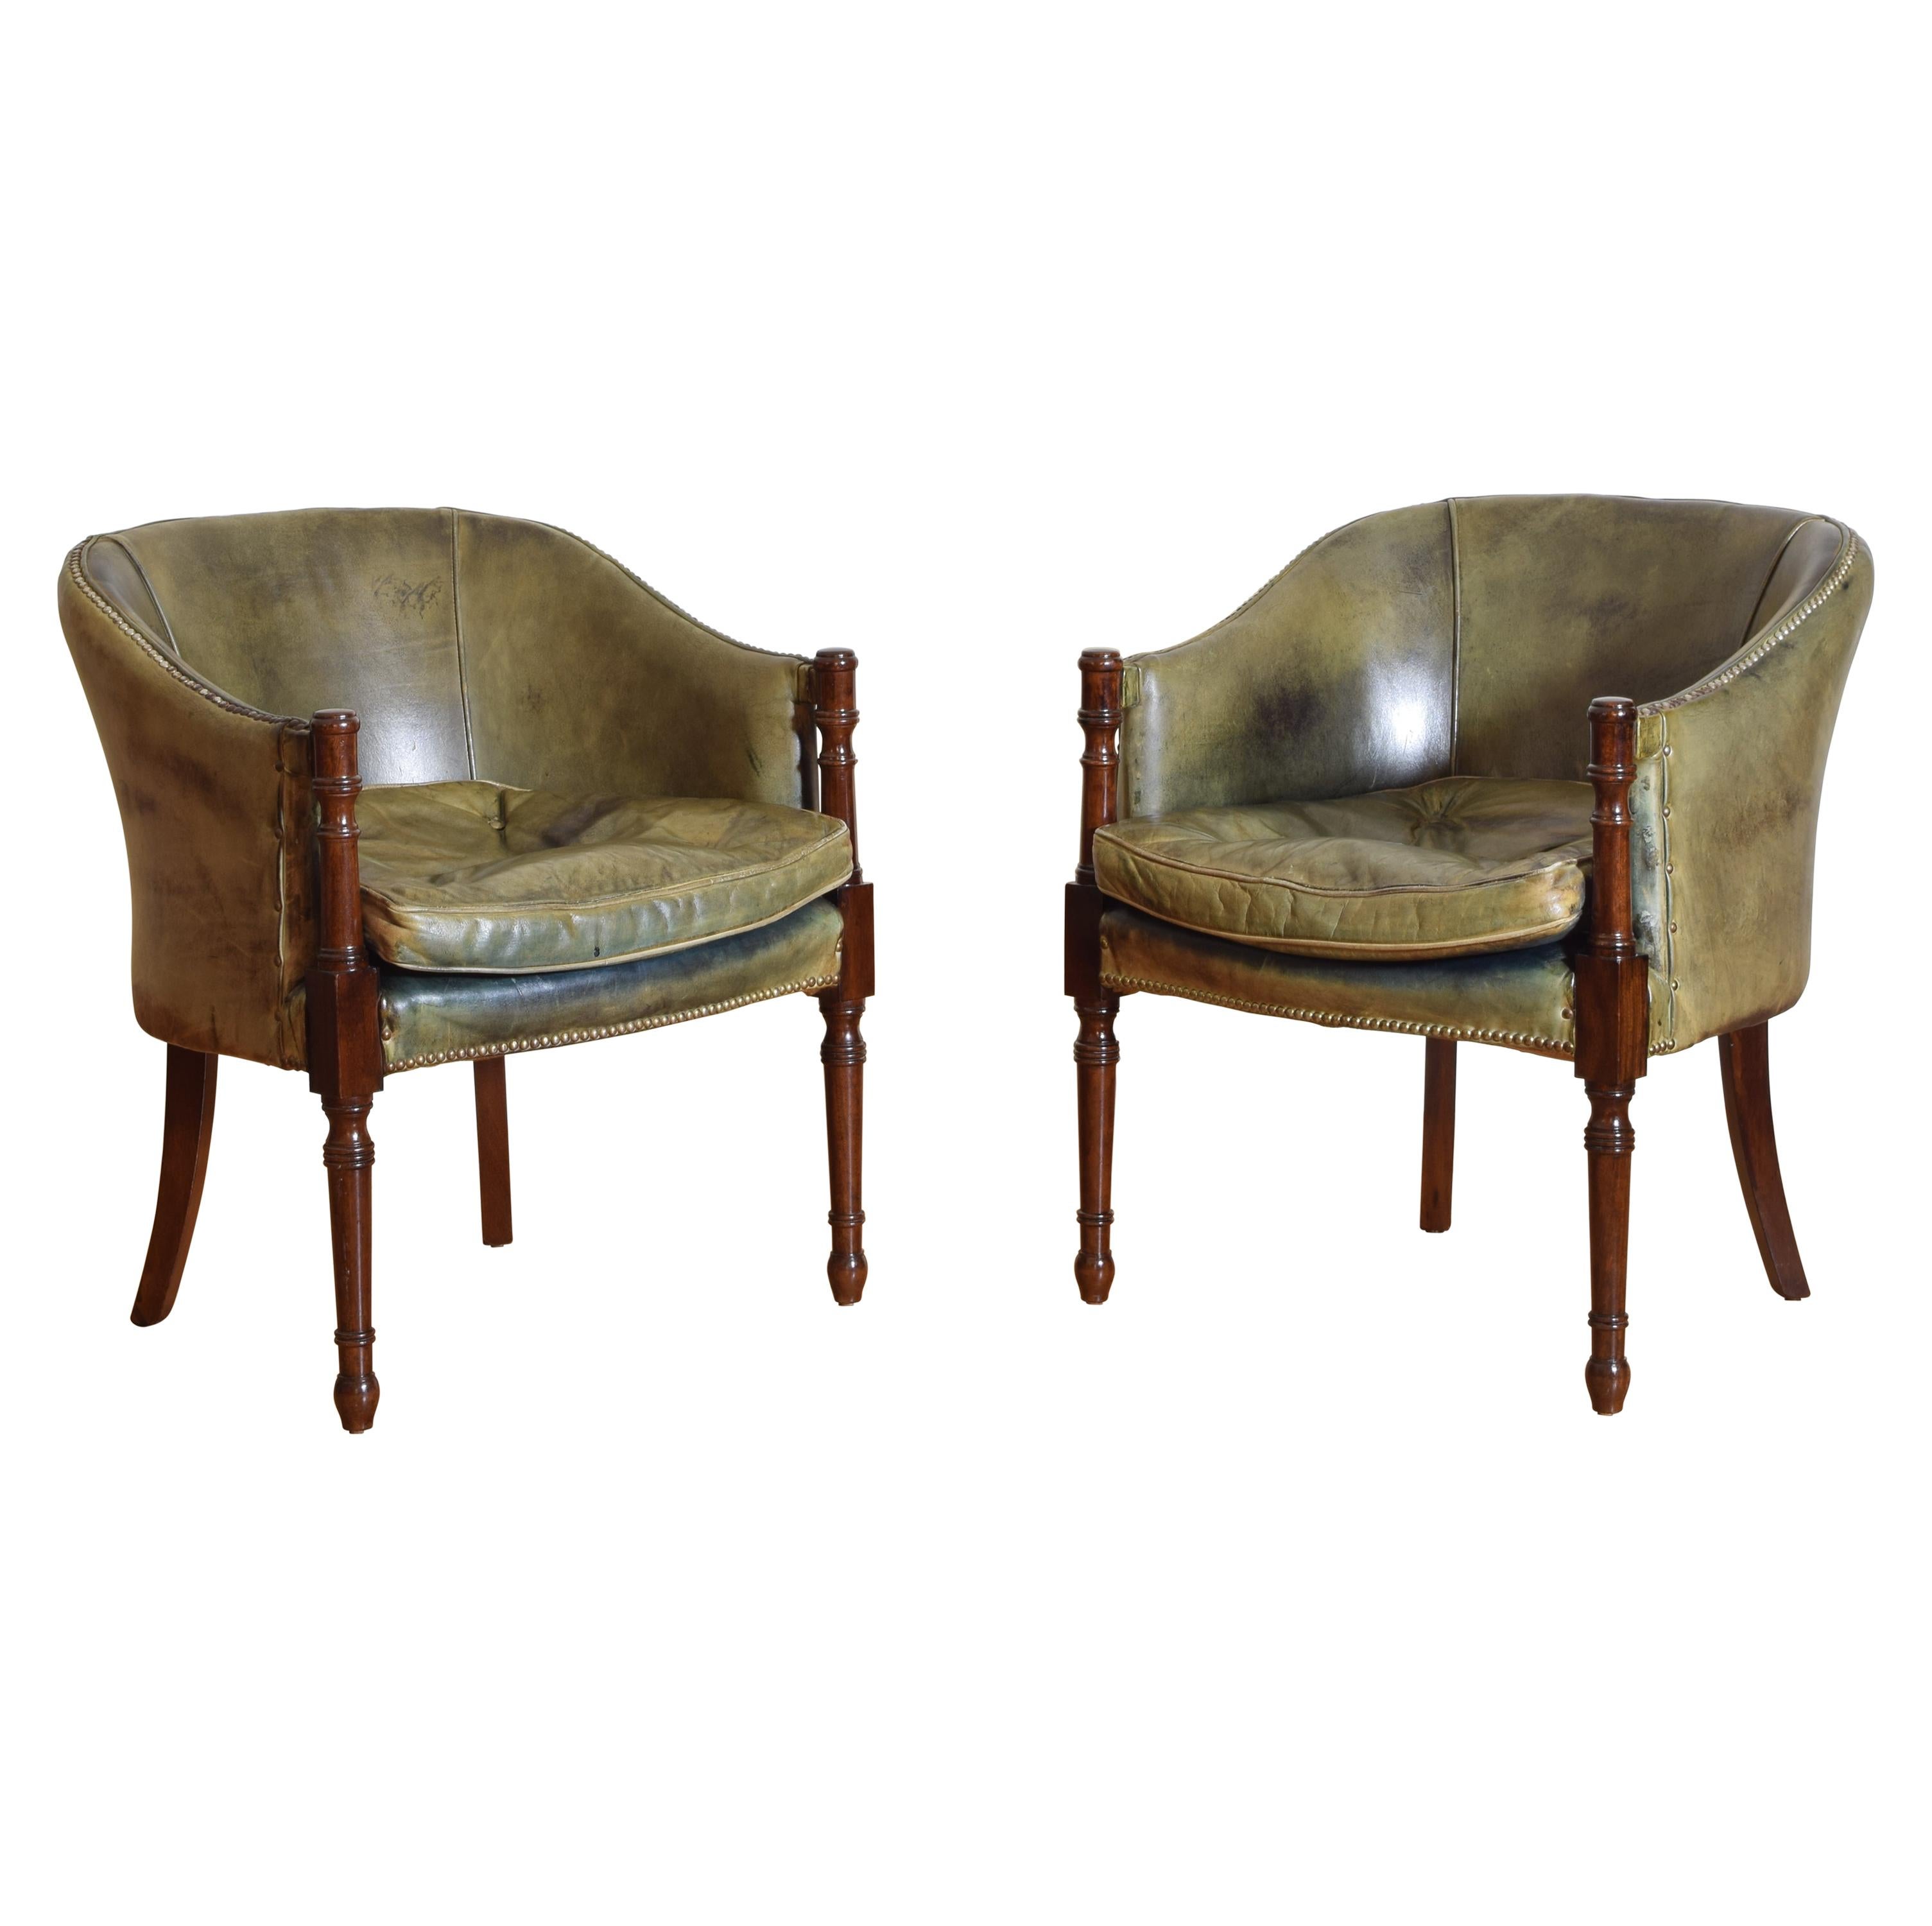 Pair of English Regency Style Mahogany Club Chairs in Green Leather 20th Century